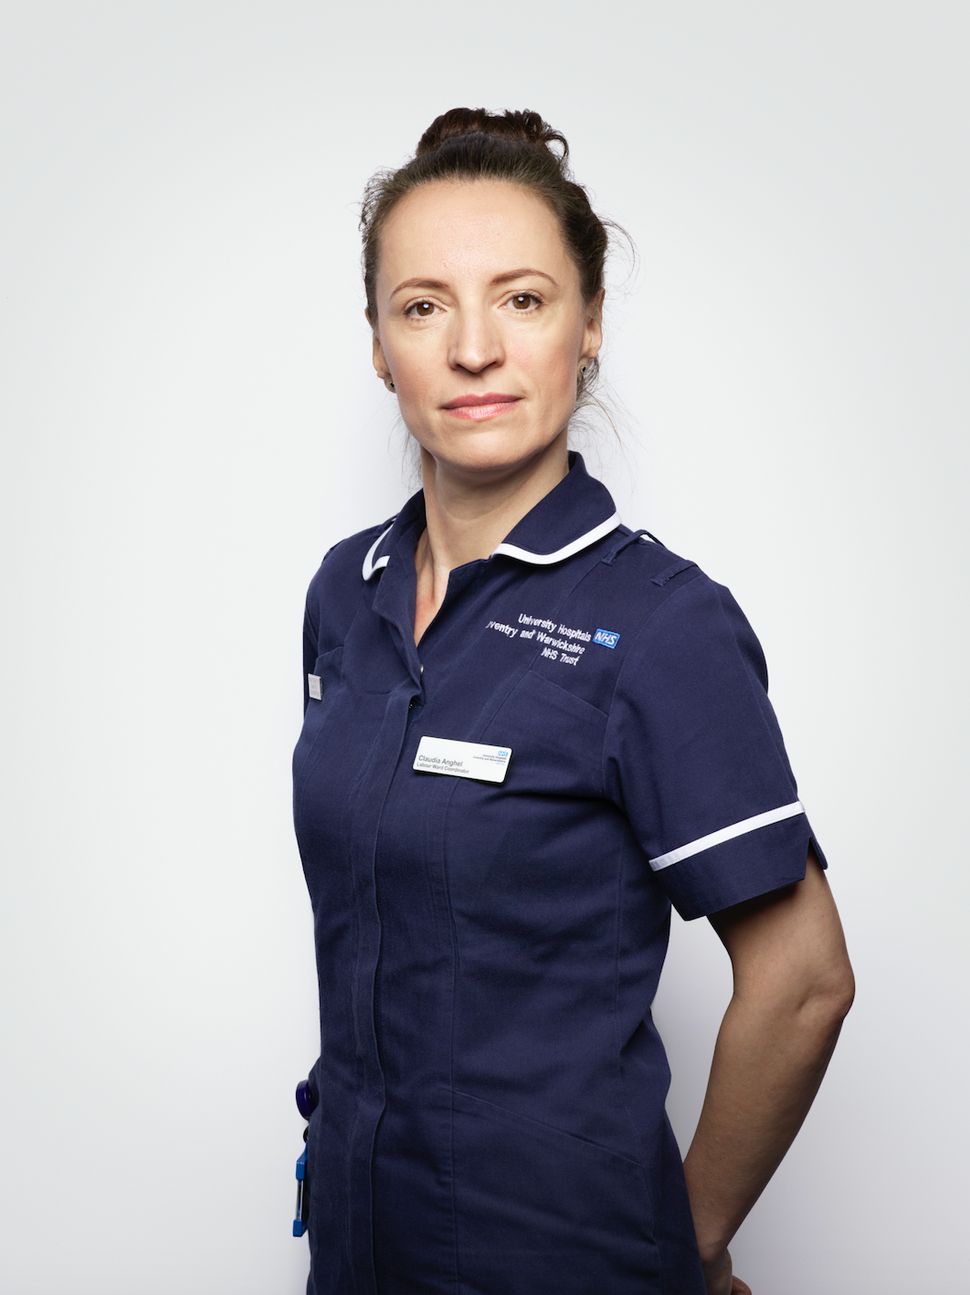 Claudia Anghel, Midwife, University Hospital Coventry and Warwickshire